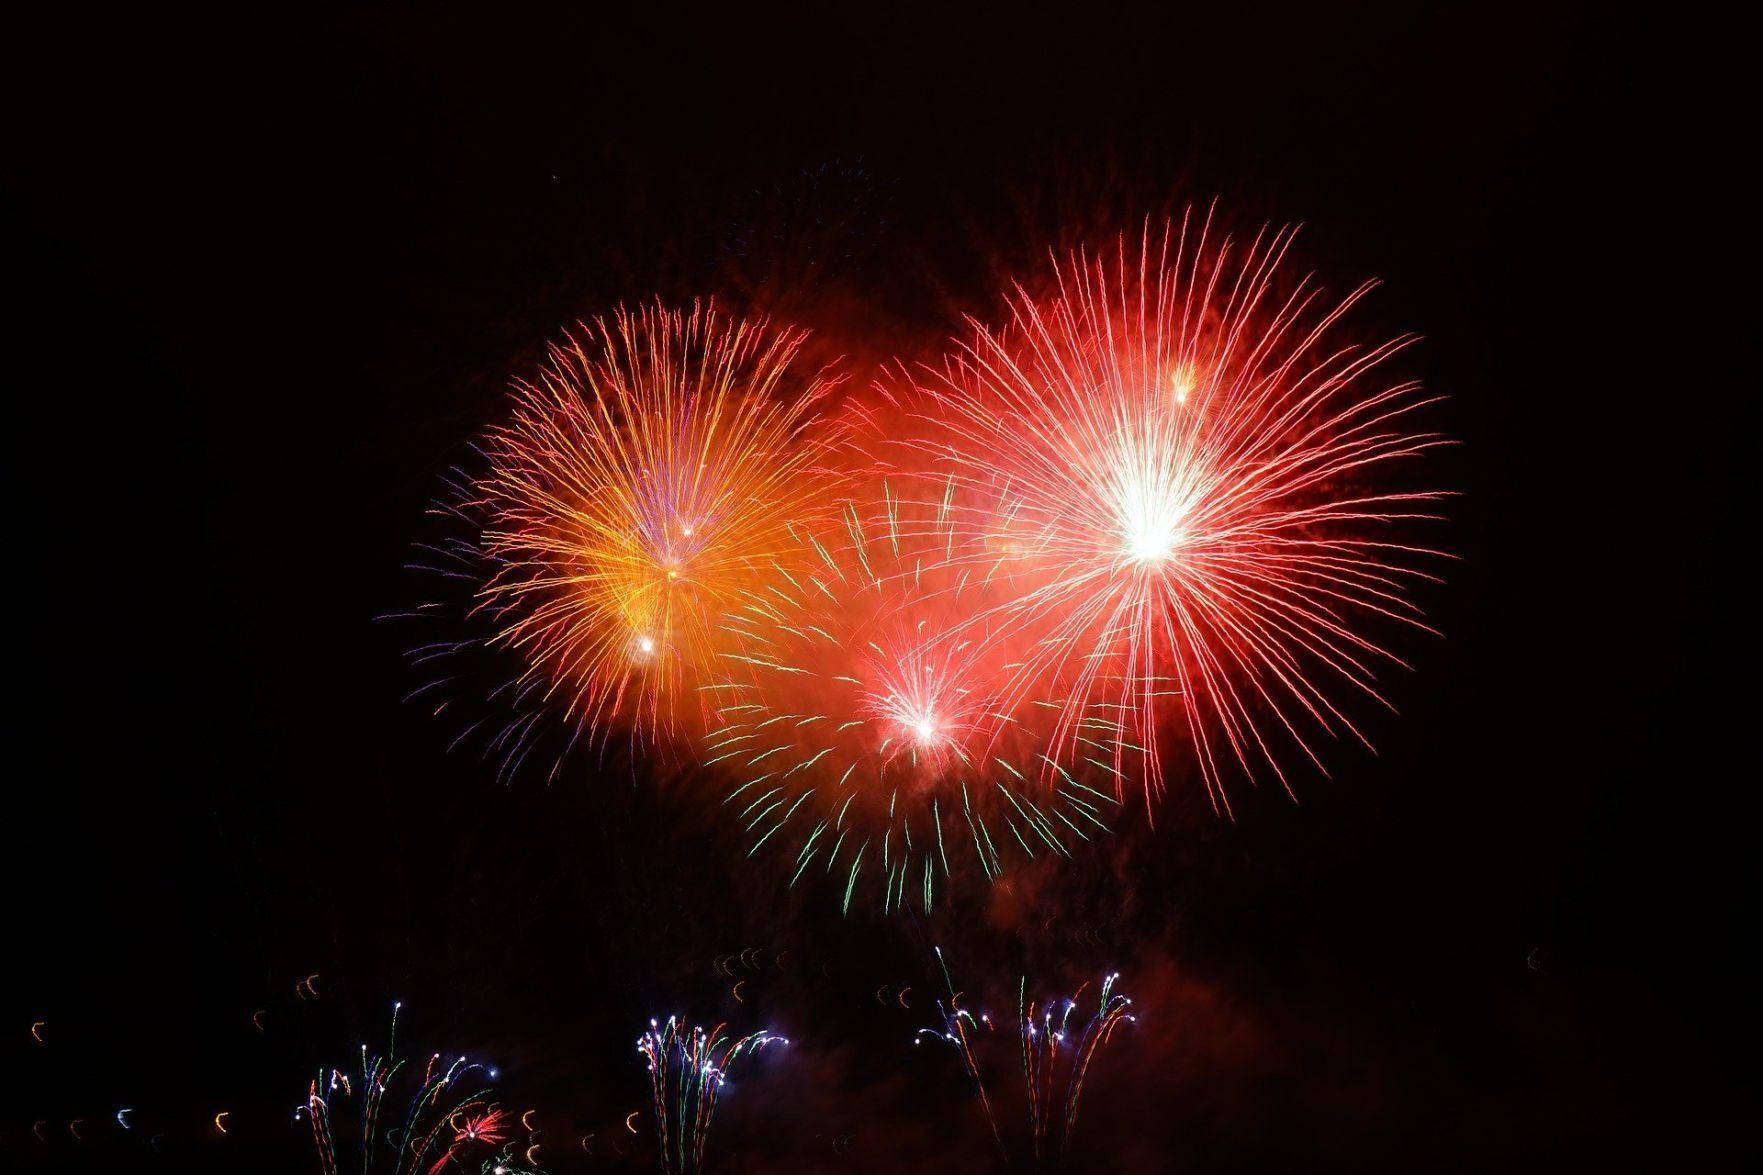 Green River annual fireworks show planned for July 4 | Community